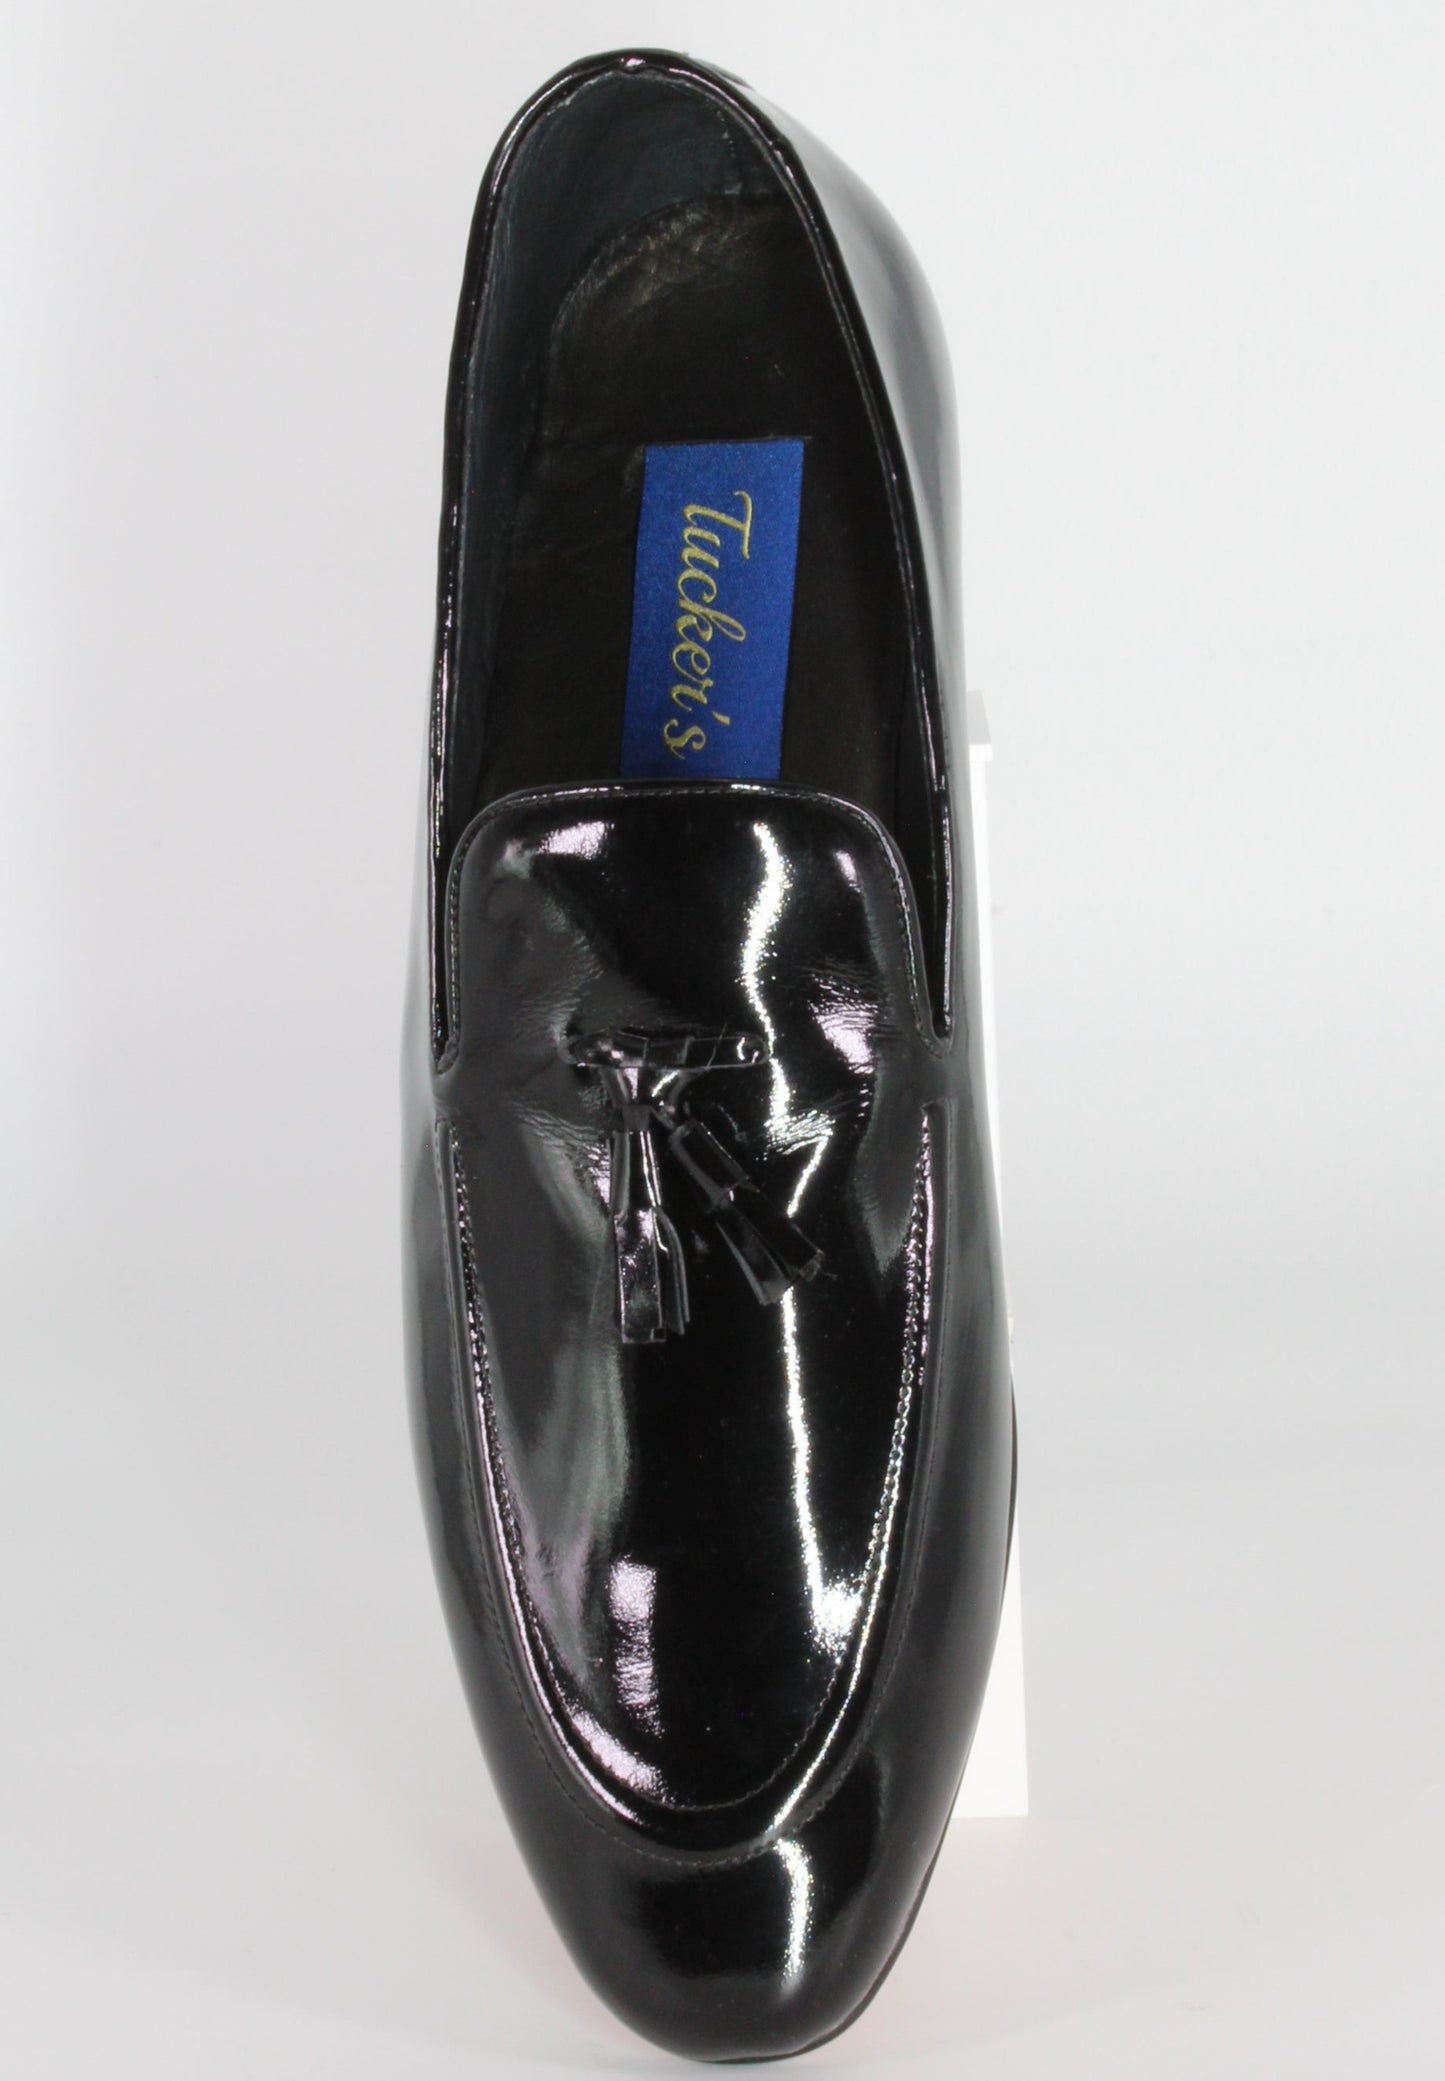 Black Patent Leather Loafer